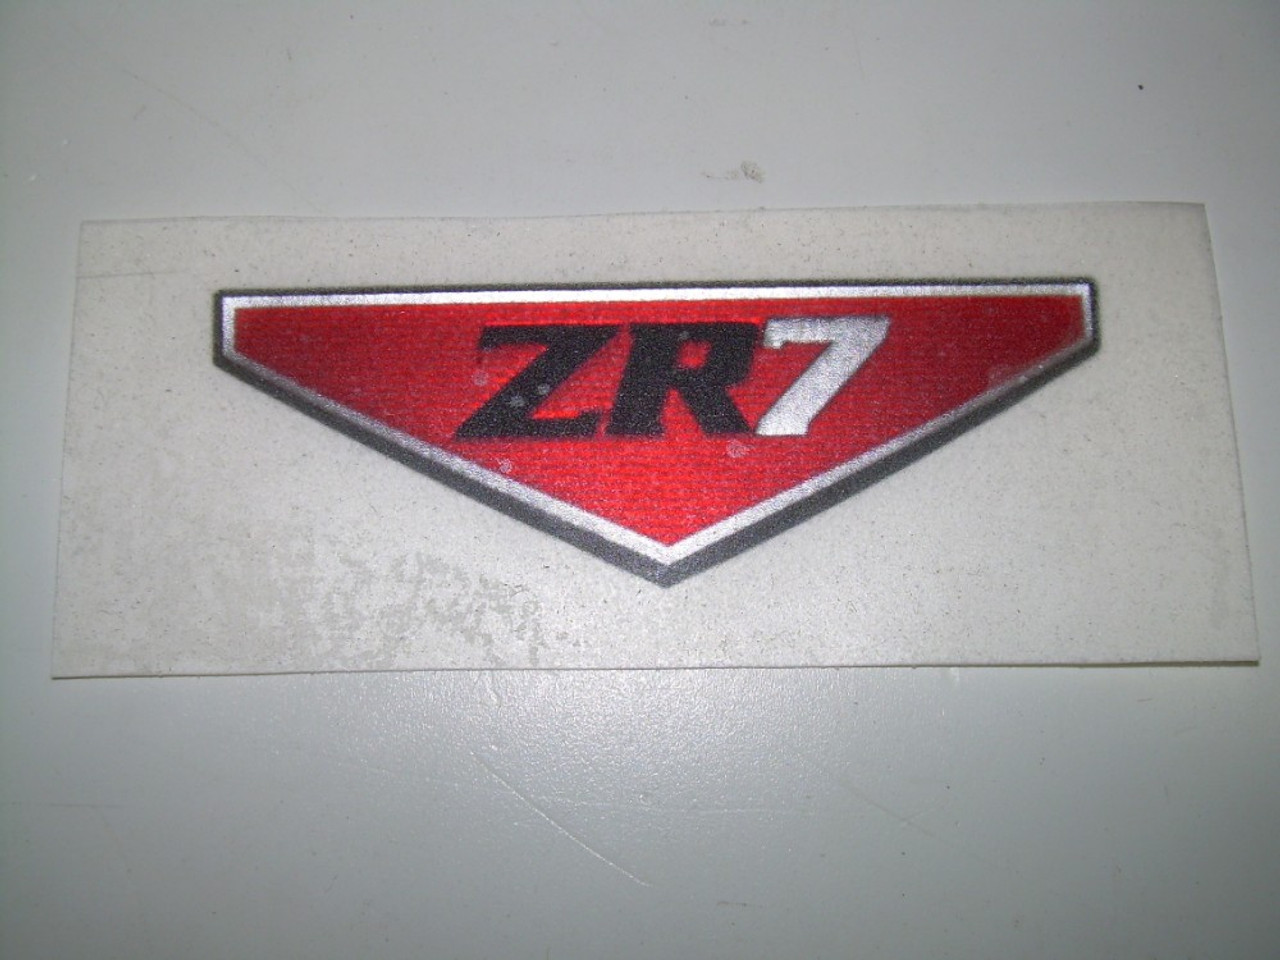 DECAL ZR7 DOMED INSERT 1.02' X 2.96" RED